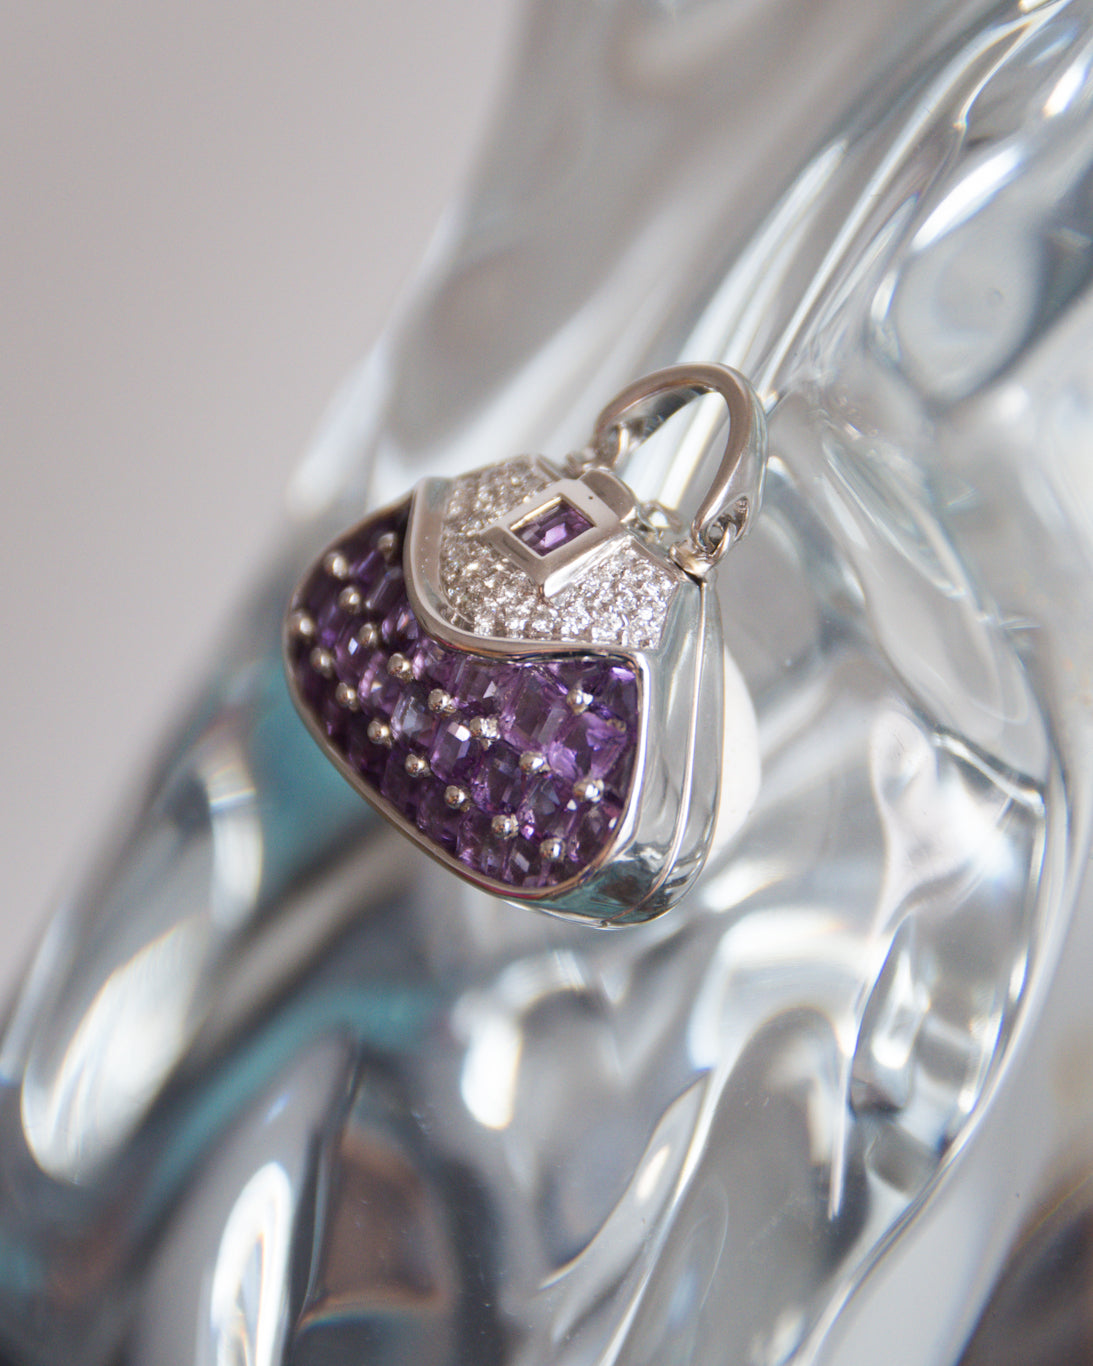 Angled view of Minaudière 18K White Gold Amethyst Evening Locket closed